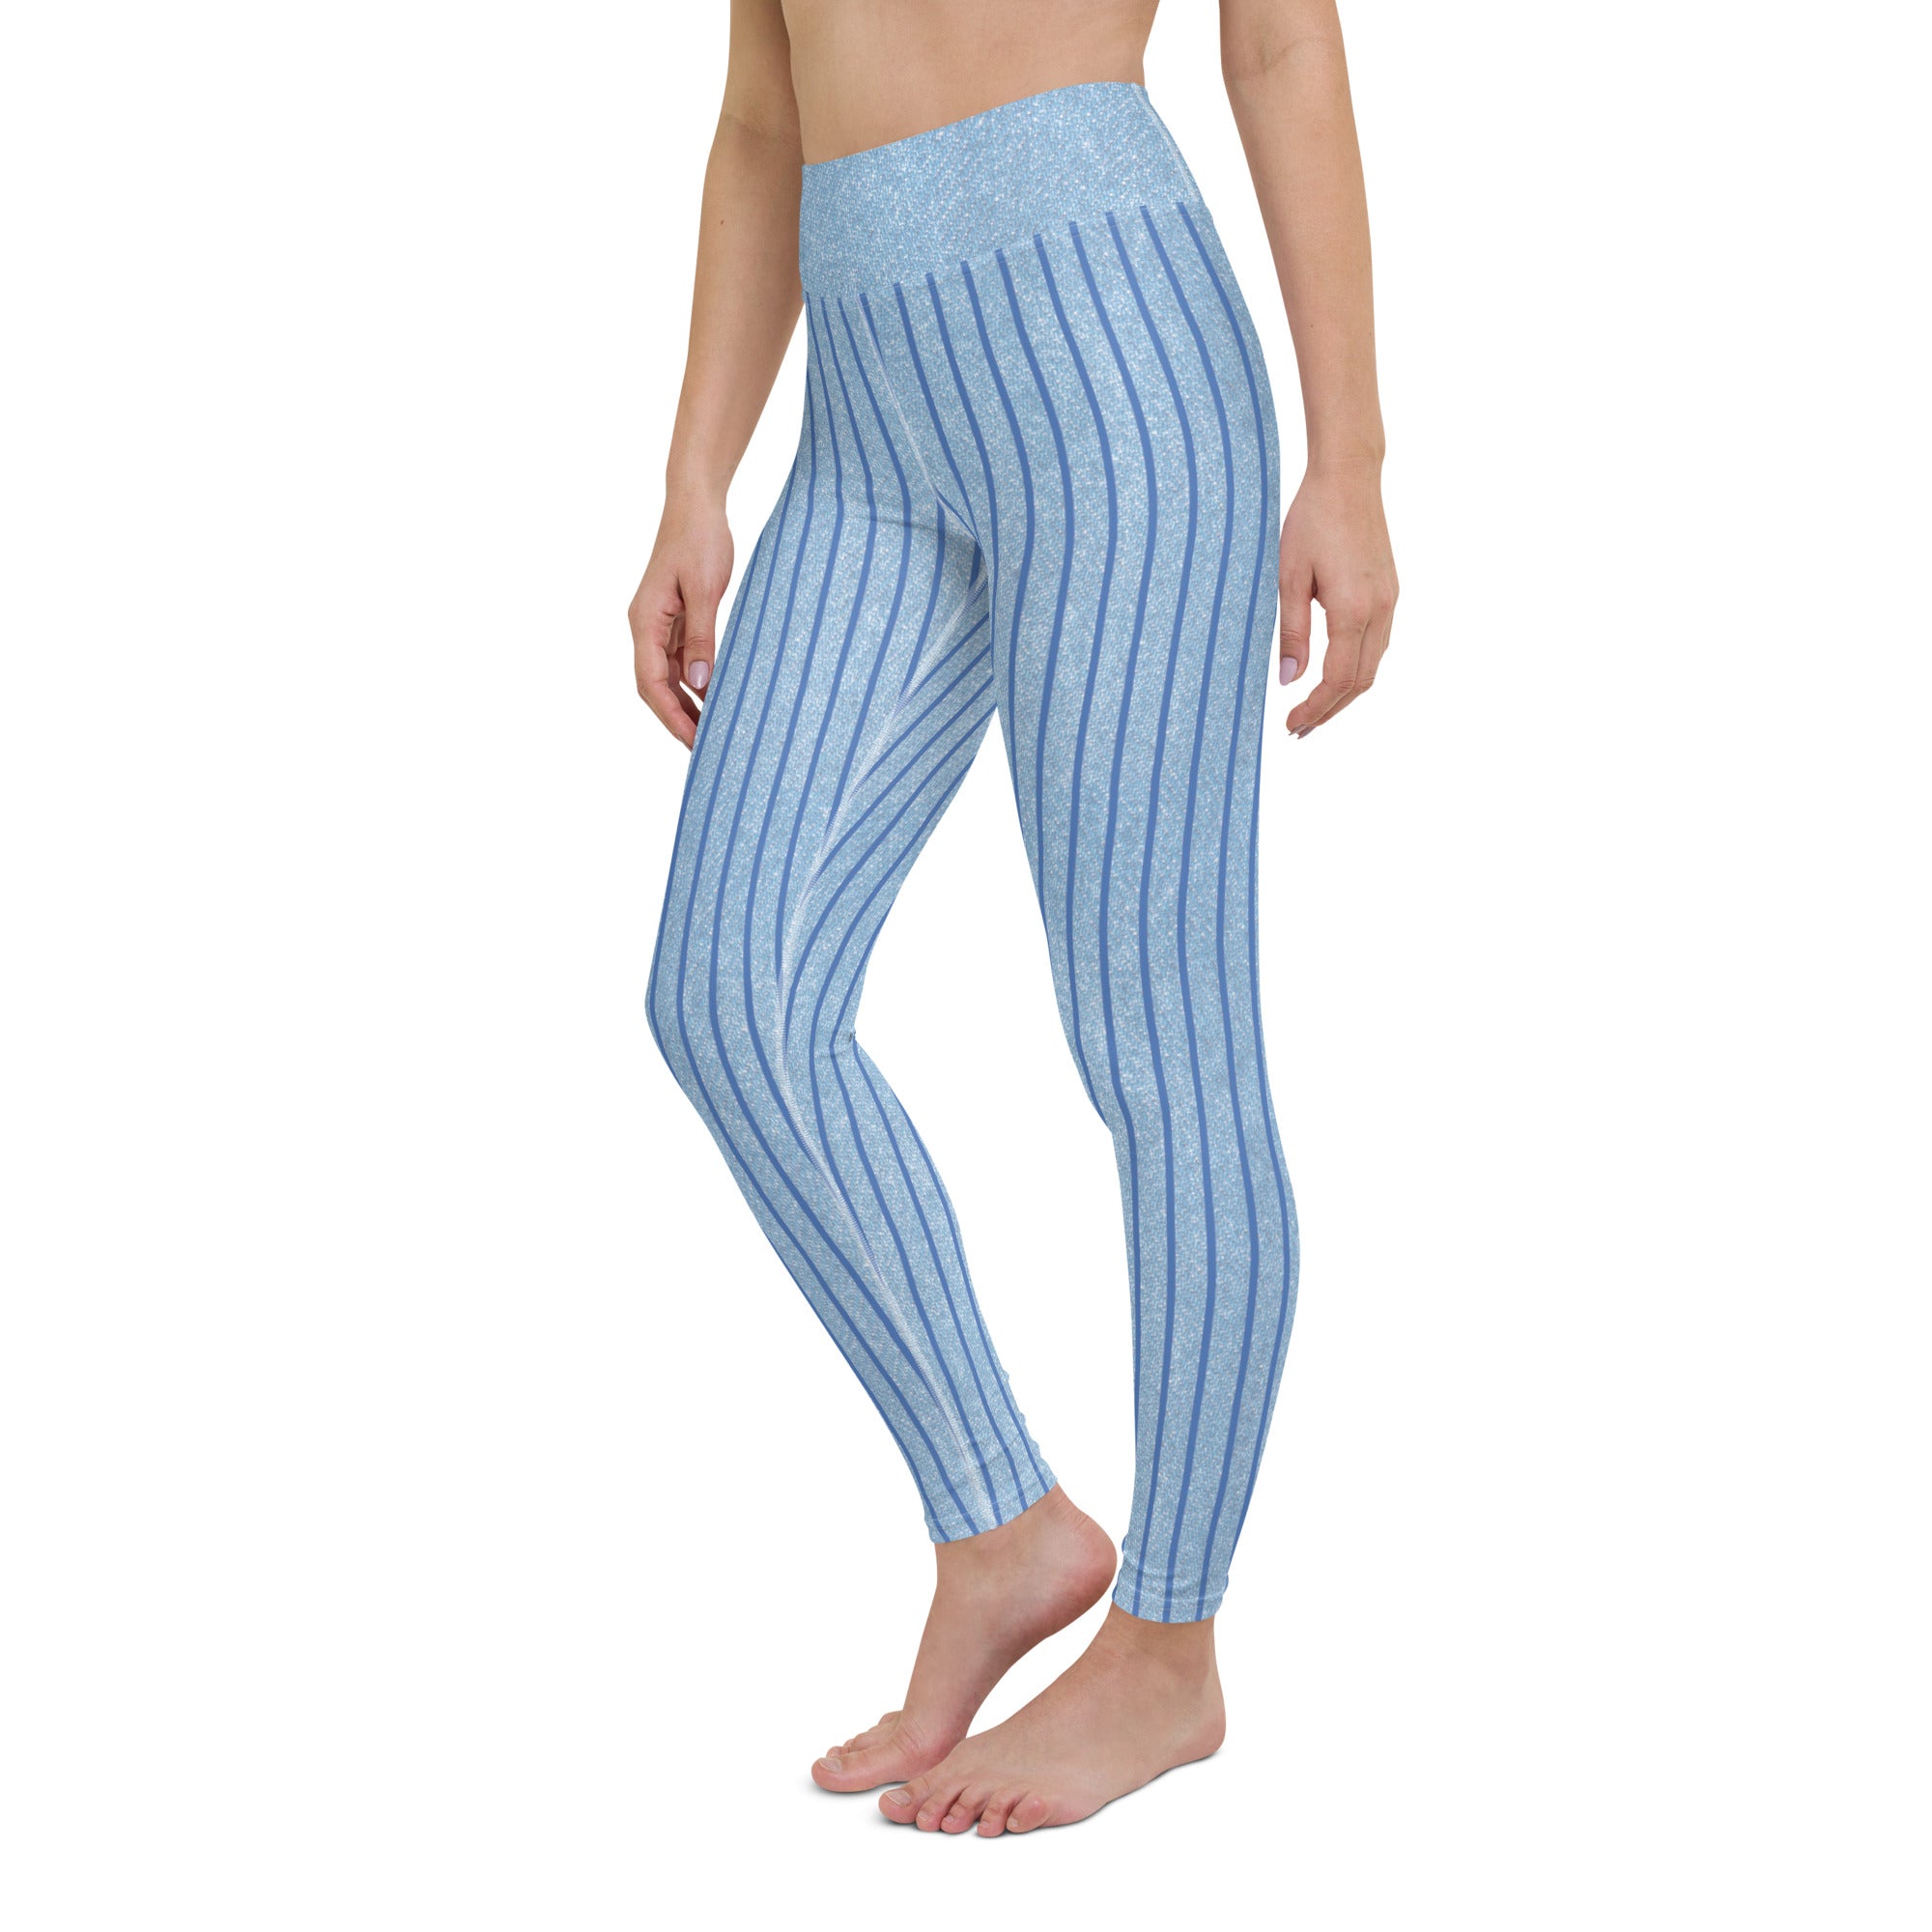 Laid out Vintage Wash Yoga Leggings capturing the essence of vintage fashion infused with yoga-ready technology.